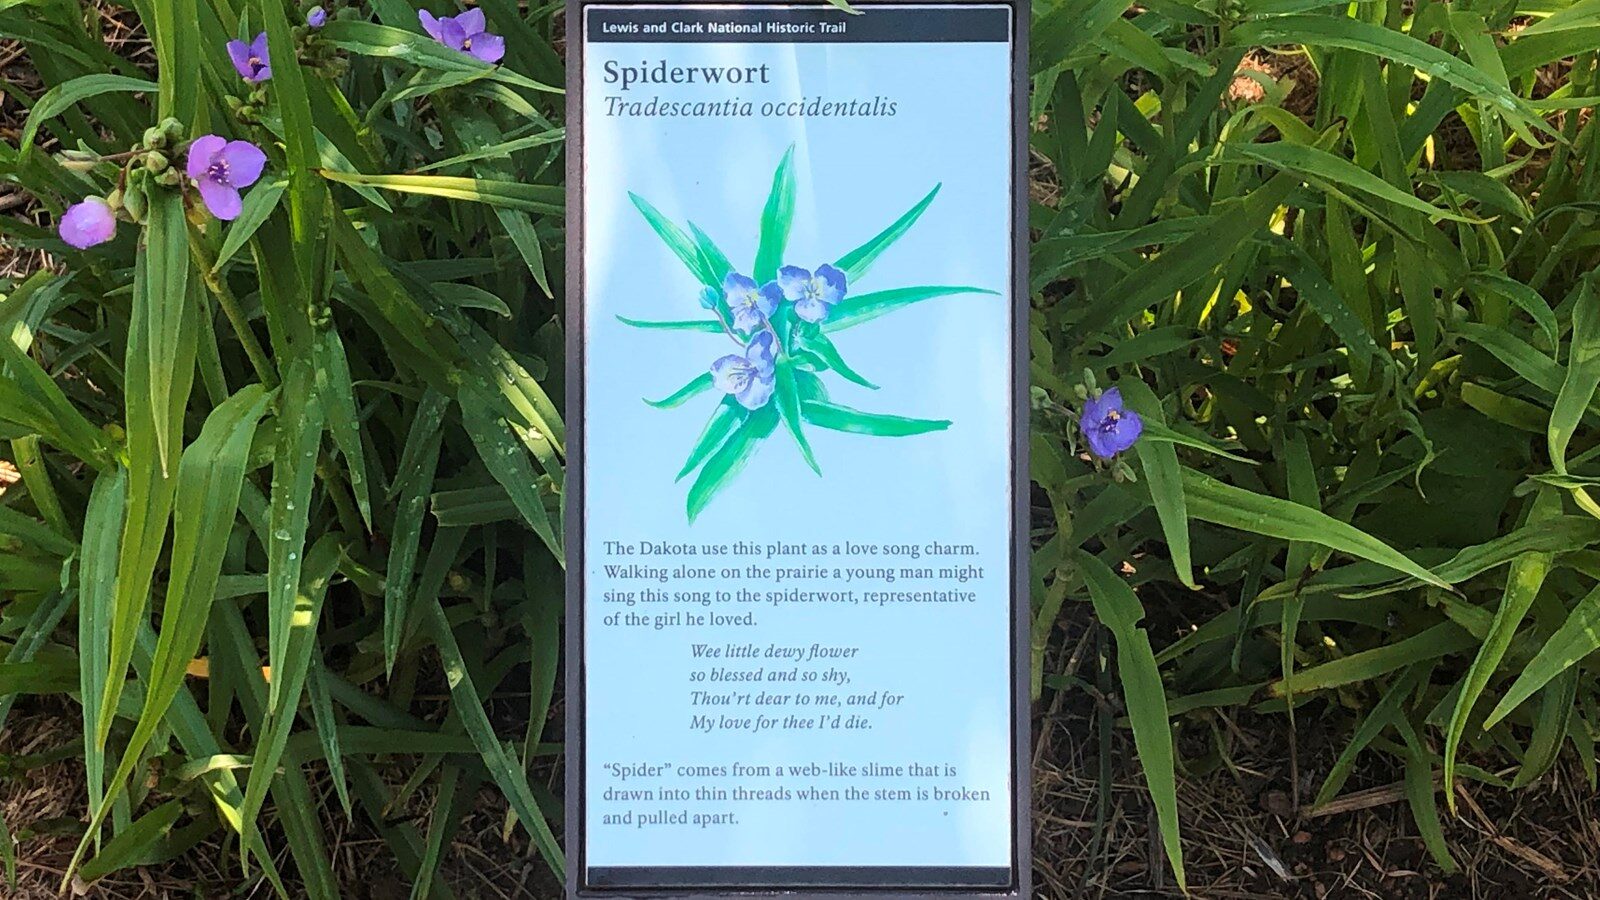 Lewis and Clark National Historic Trail Visitor Center- “Spiderwort”